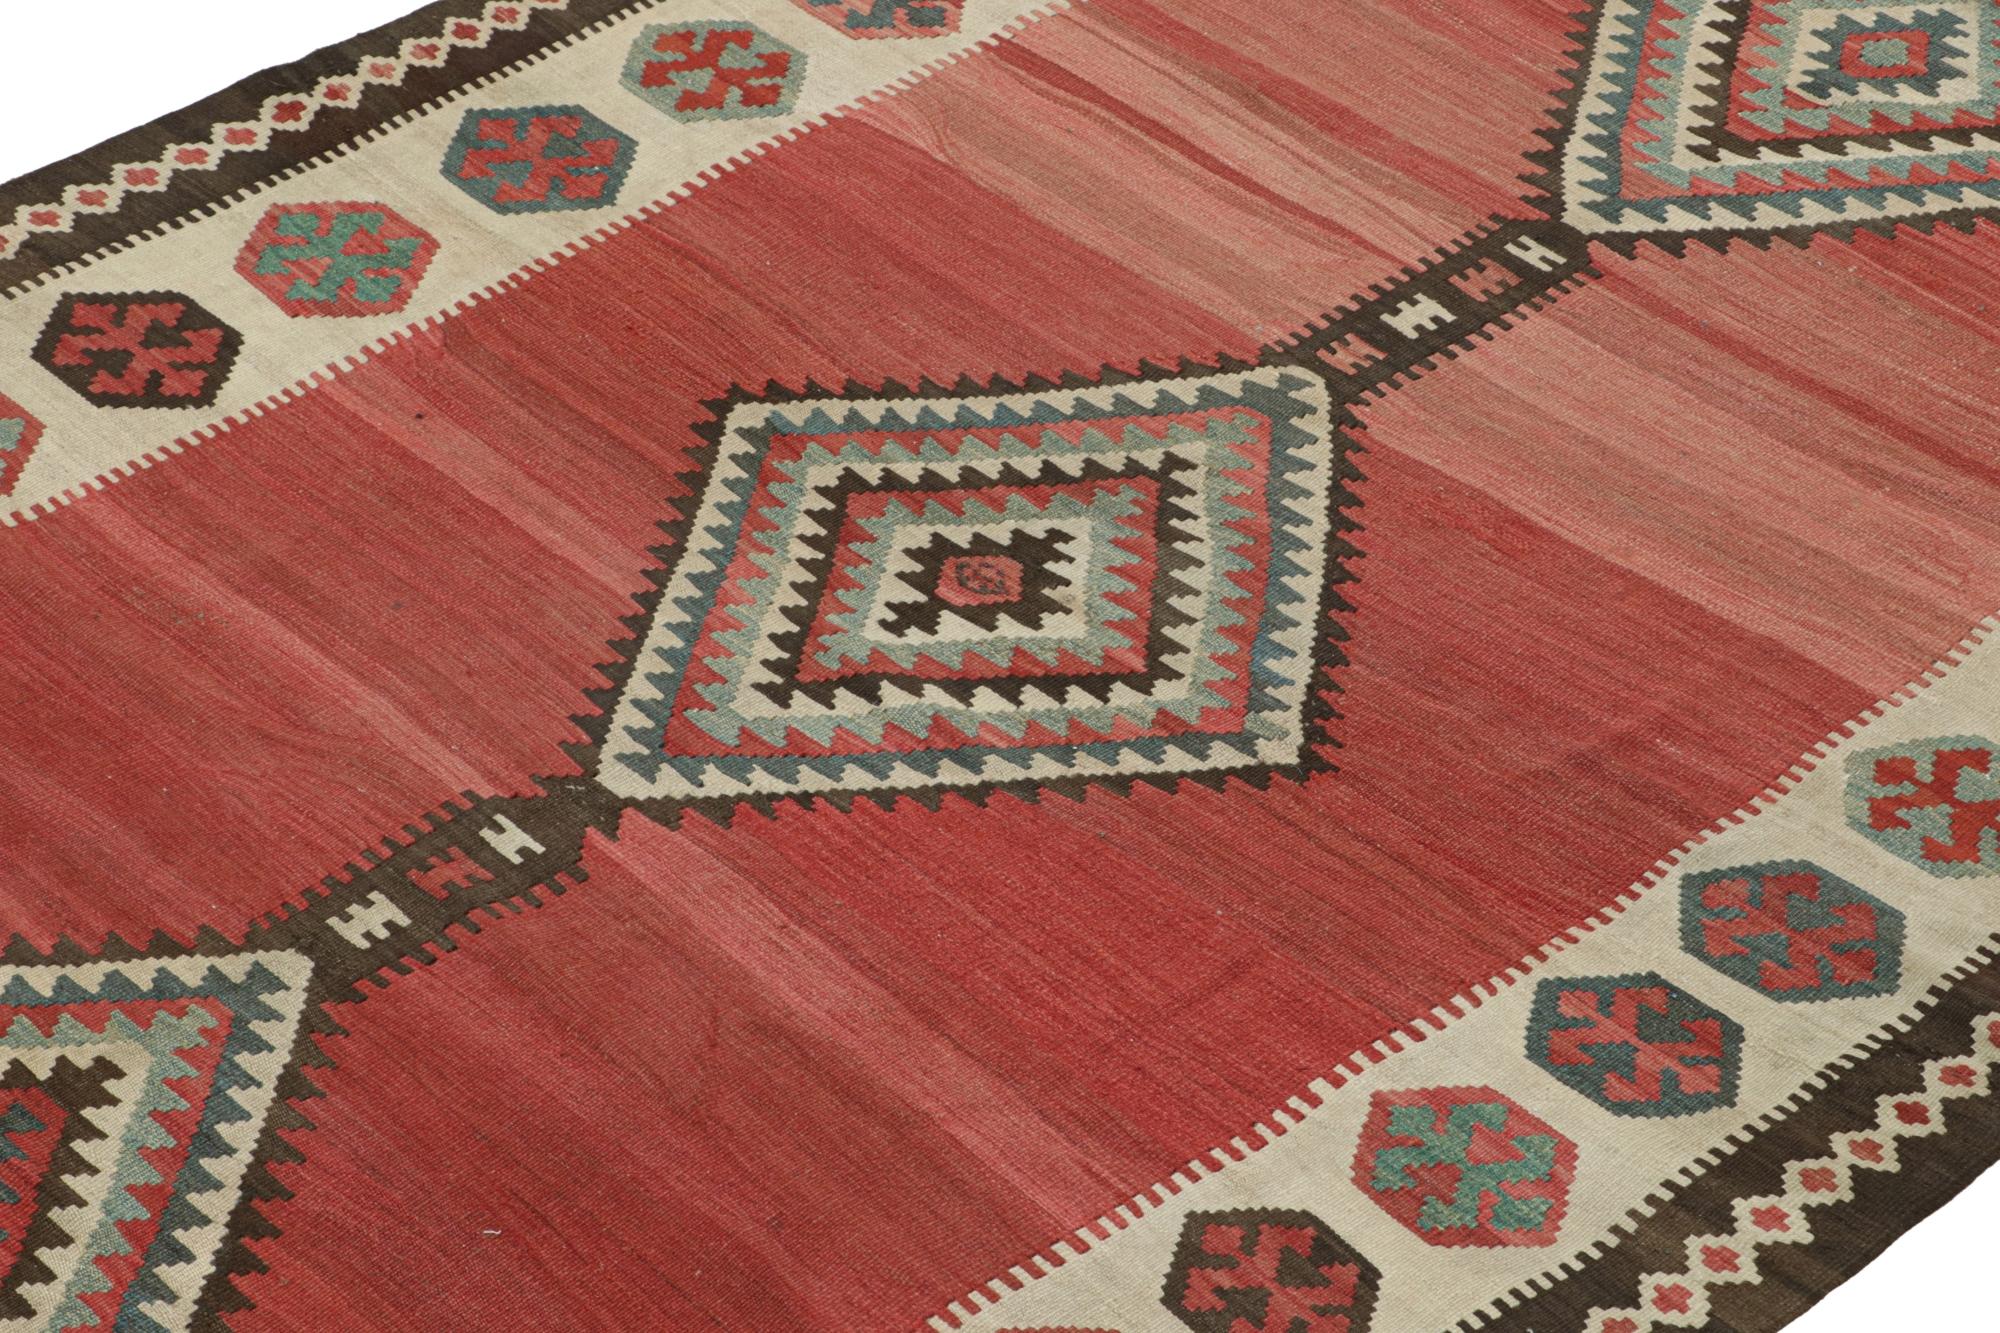 Handwoven in wool circa 1950, this 5x11 vintage Shahsavan Persian kilim is an exciting new curation.

On The Design:

This flatweave enjoys sharp medallions on a bold red open field, with the same hue beside beige-brown and sky blue.